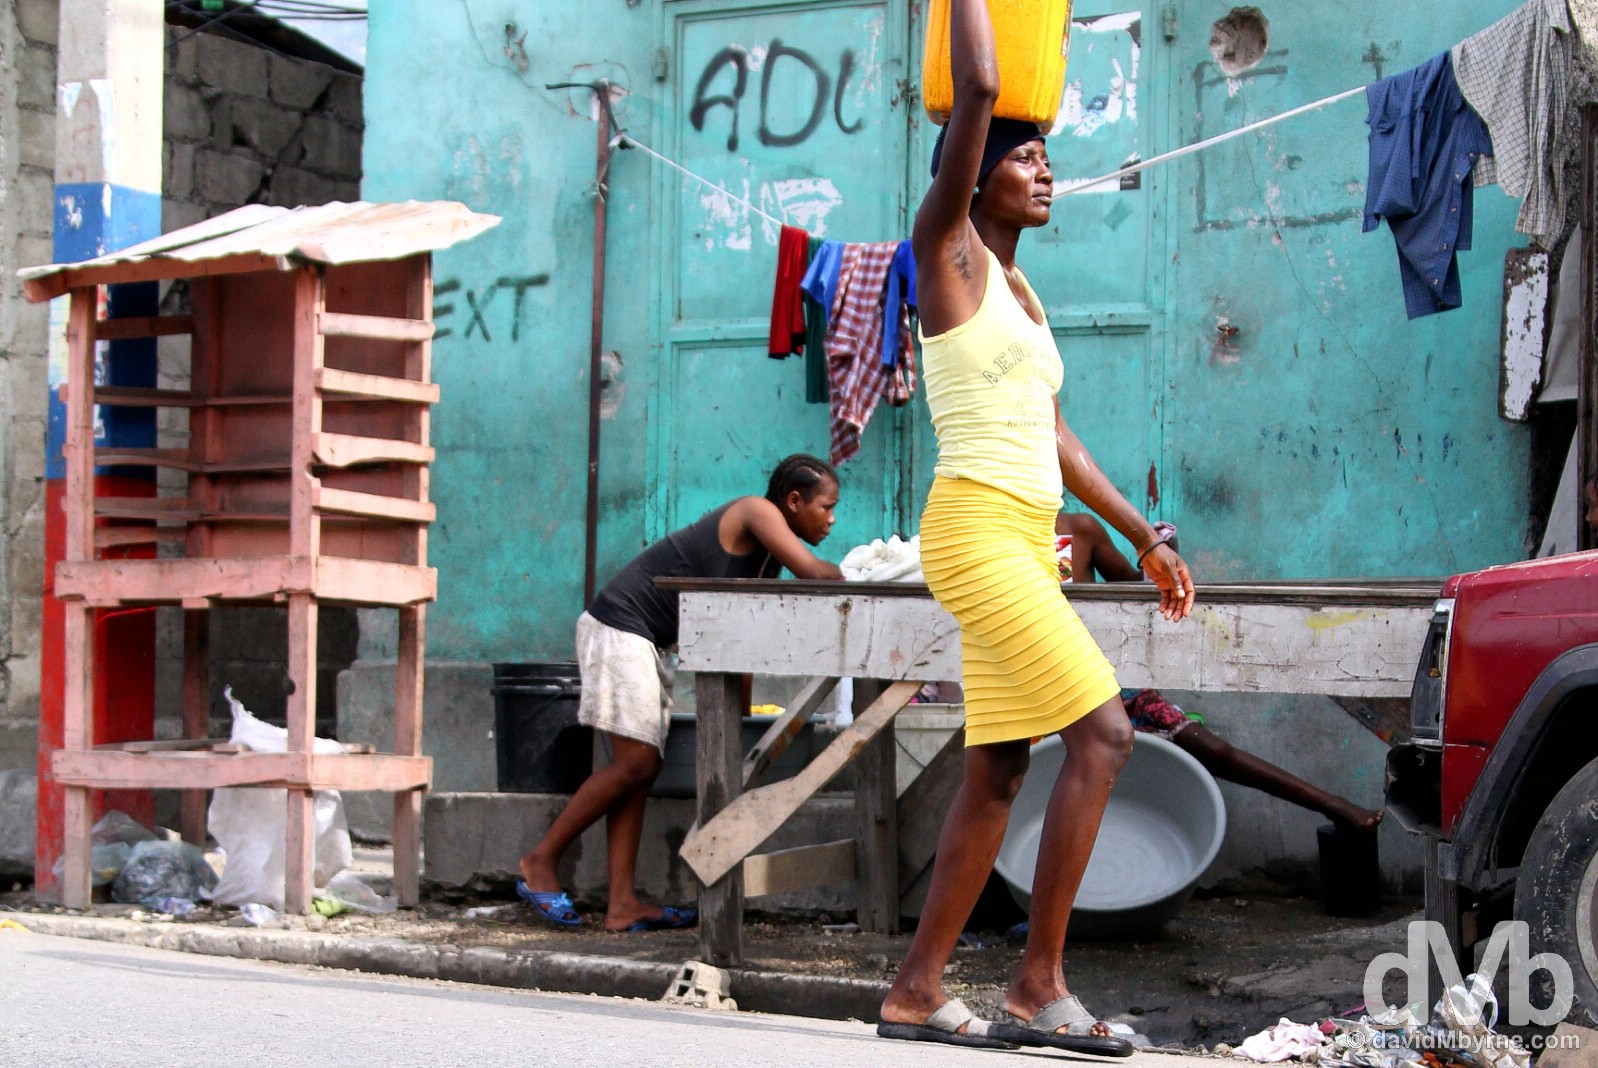 On the streets of Port-au-Prince, Haiti. May 17, 2015.